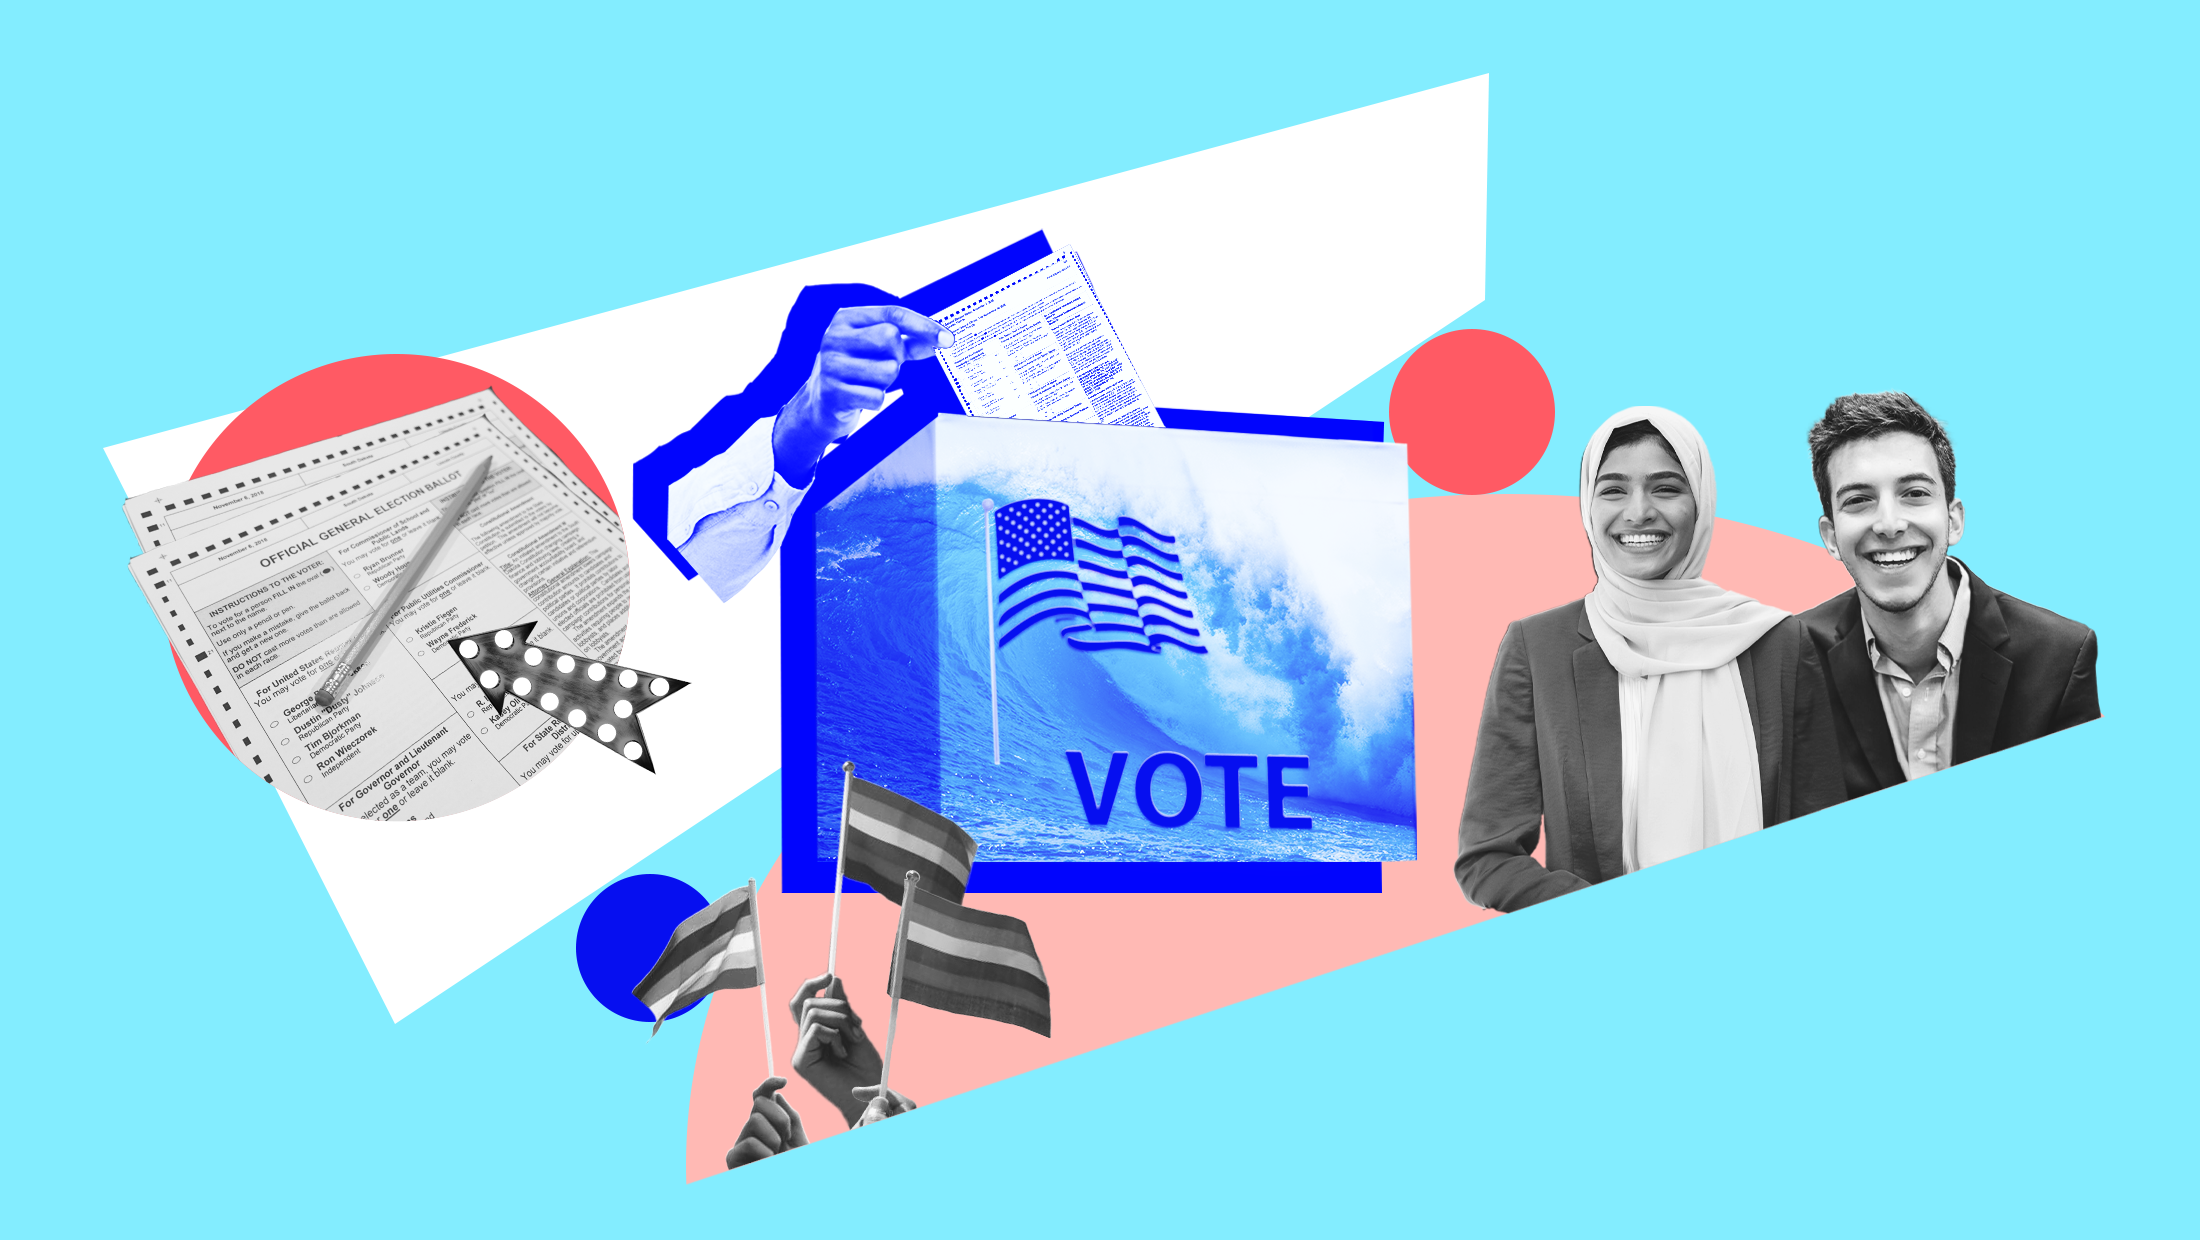 Light blue background with image of blue wave, an American flag and the word "VOTE" laid over a ballot box and someone inserting their ballot into the box, a black and white image of a ballot that reads "OFFICIAL GENERAL ELECTION BALLOT" and an arrow pointing to it, a black and white image of three pride flags and a black and white image of two young people smiling.